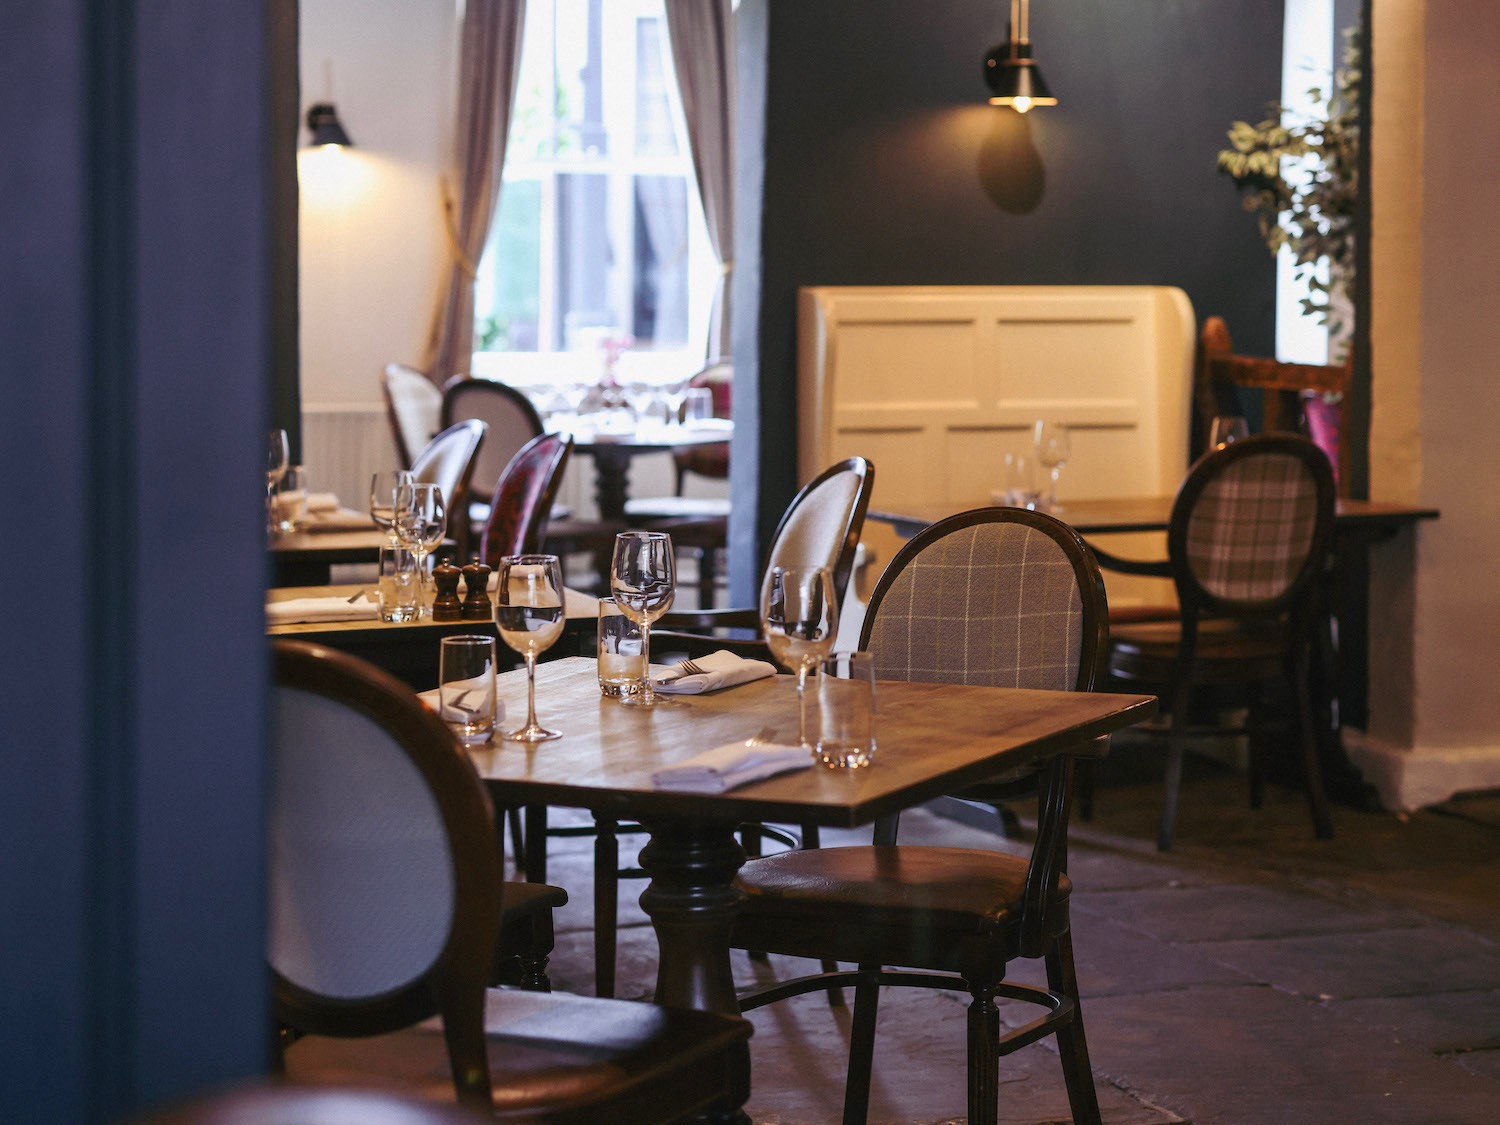 Win a three-course meal and overnight stay at The White Hart, Welwyn